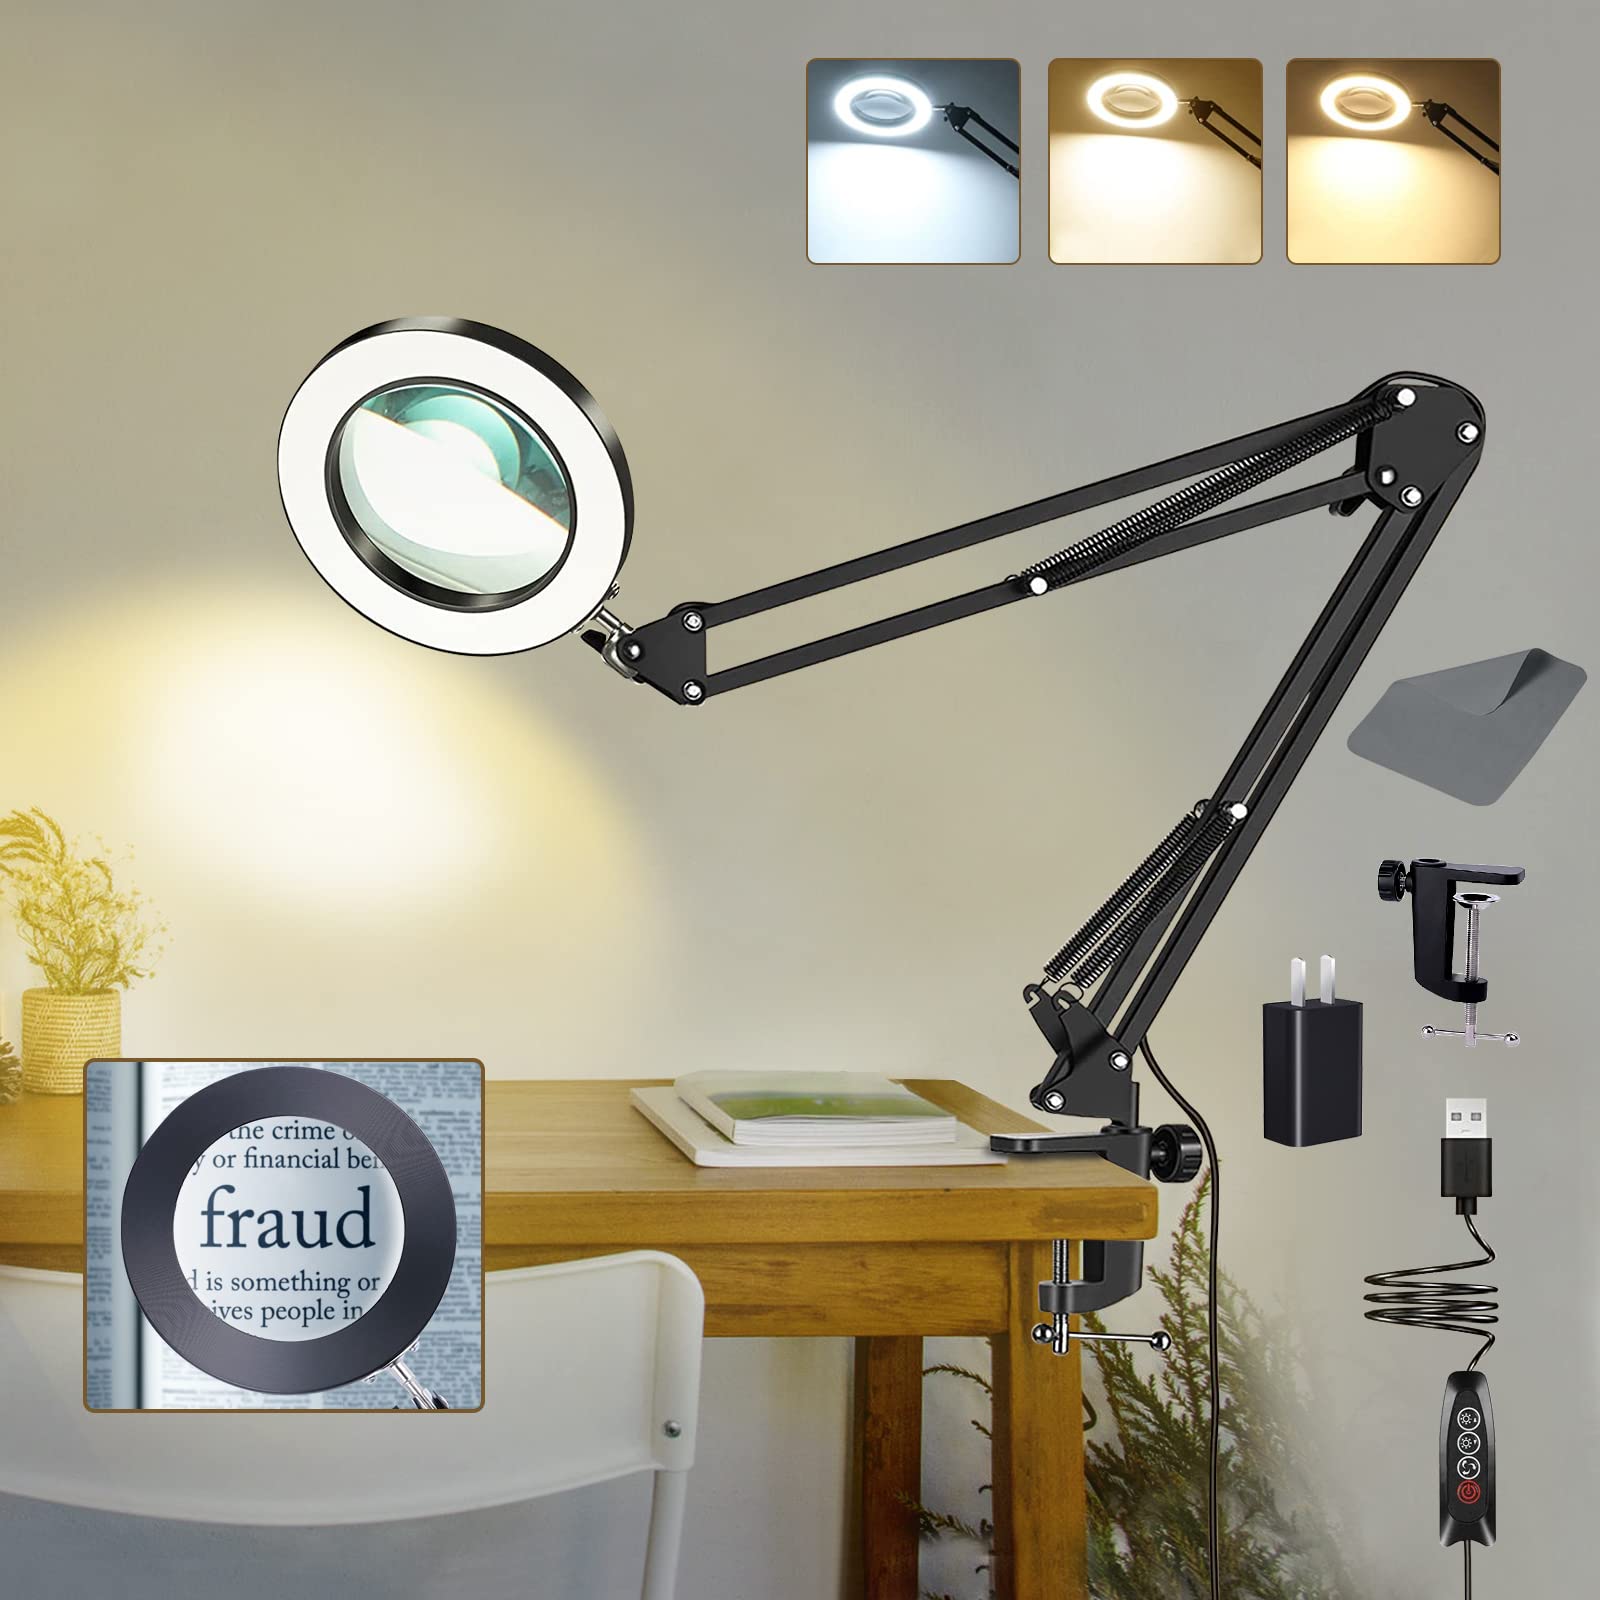 Magnifying Glass With Light And Stand, 10x Magnifying Lamp, 2-in-1